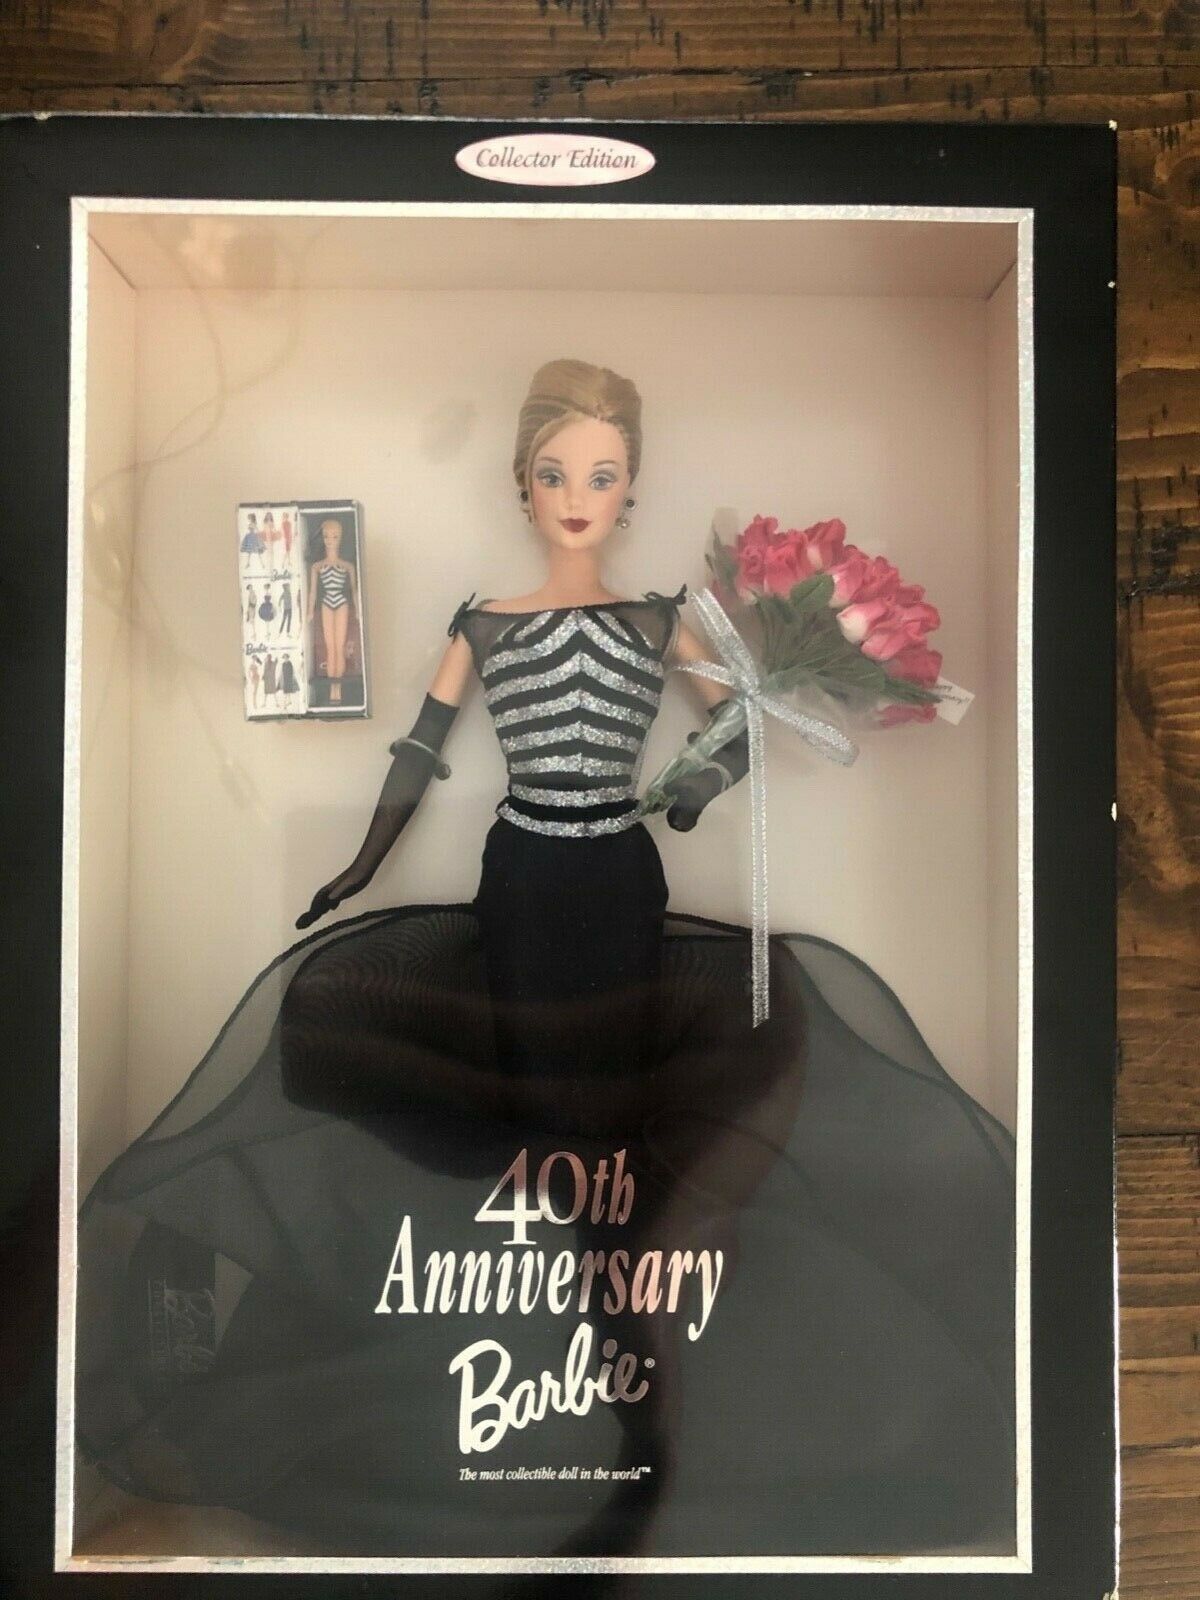 40th Anniversary Barbie Doll - Collector Edition (1999). Never Opened.